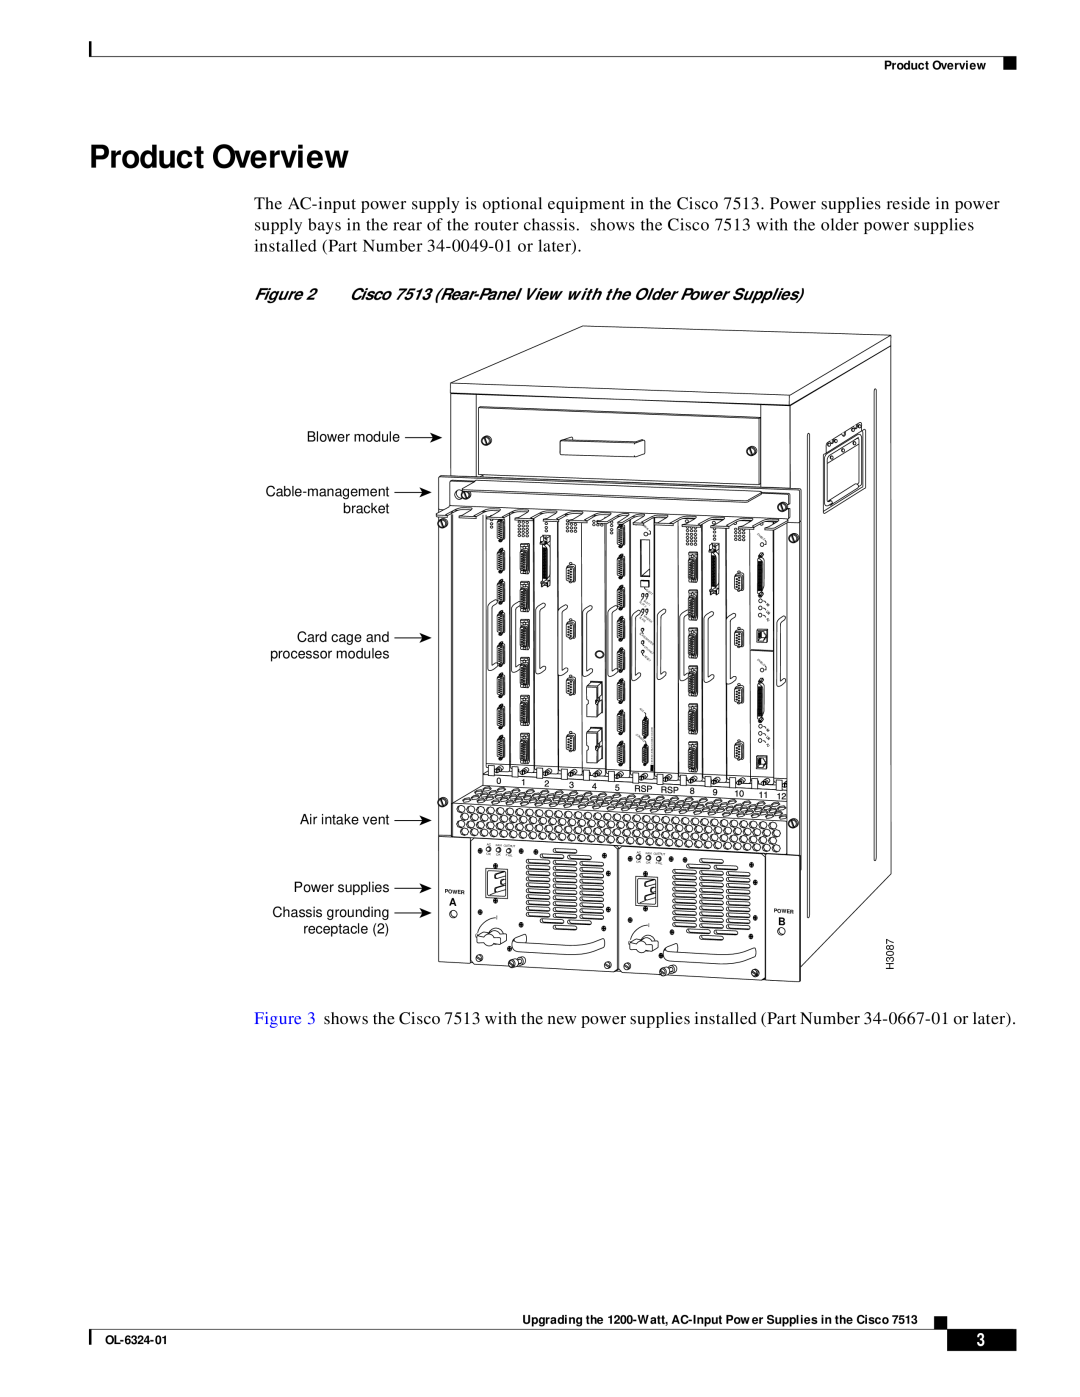 Cisco Systems manual Product Overview, Cisco 7513 Rear-Panel View with the Older Power Supplies 